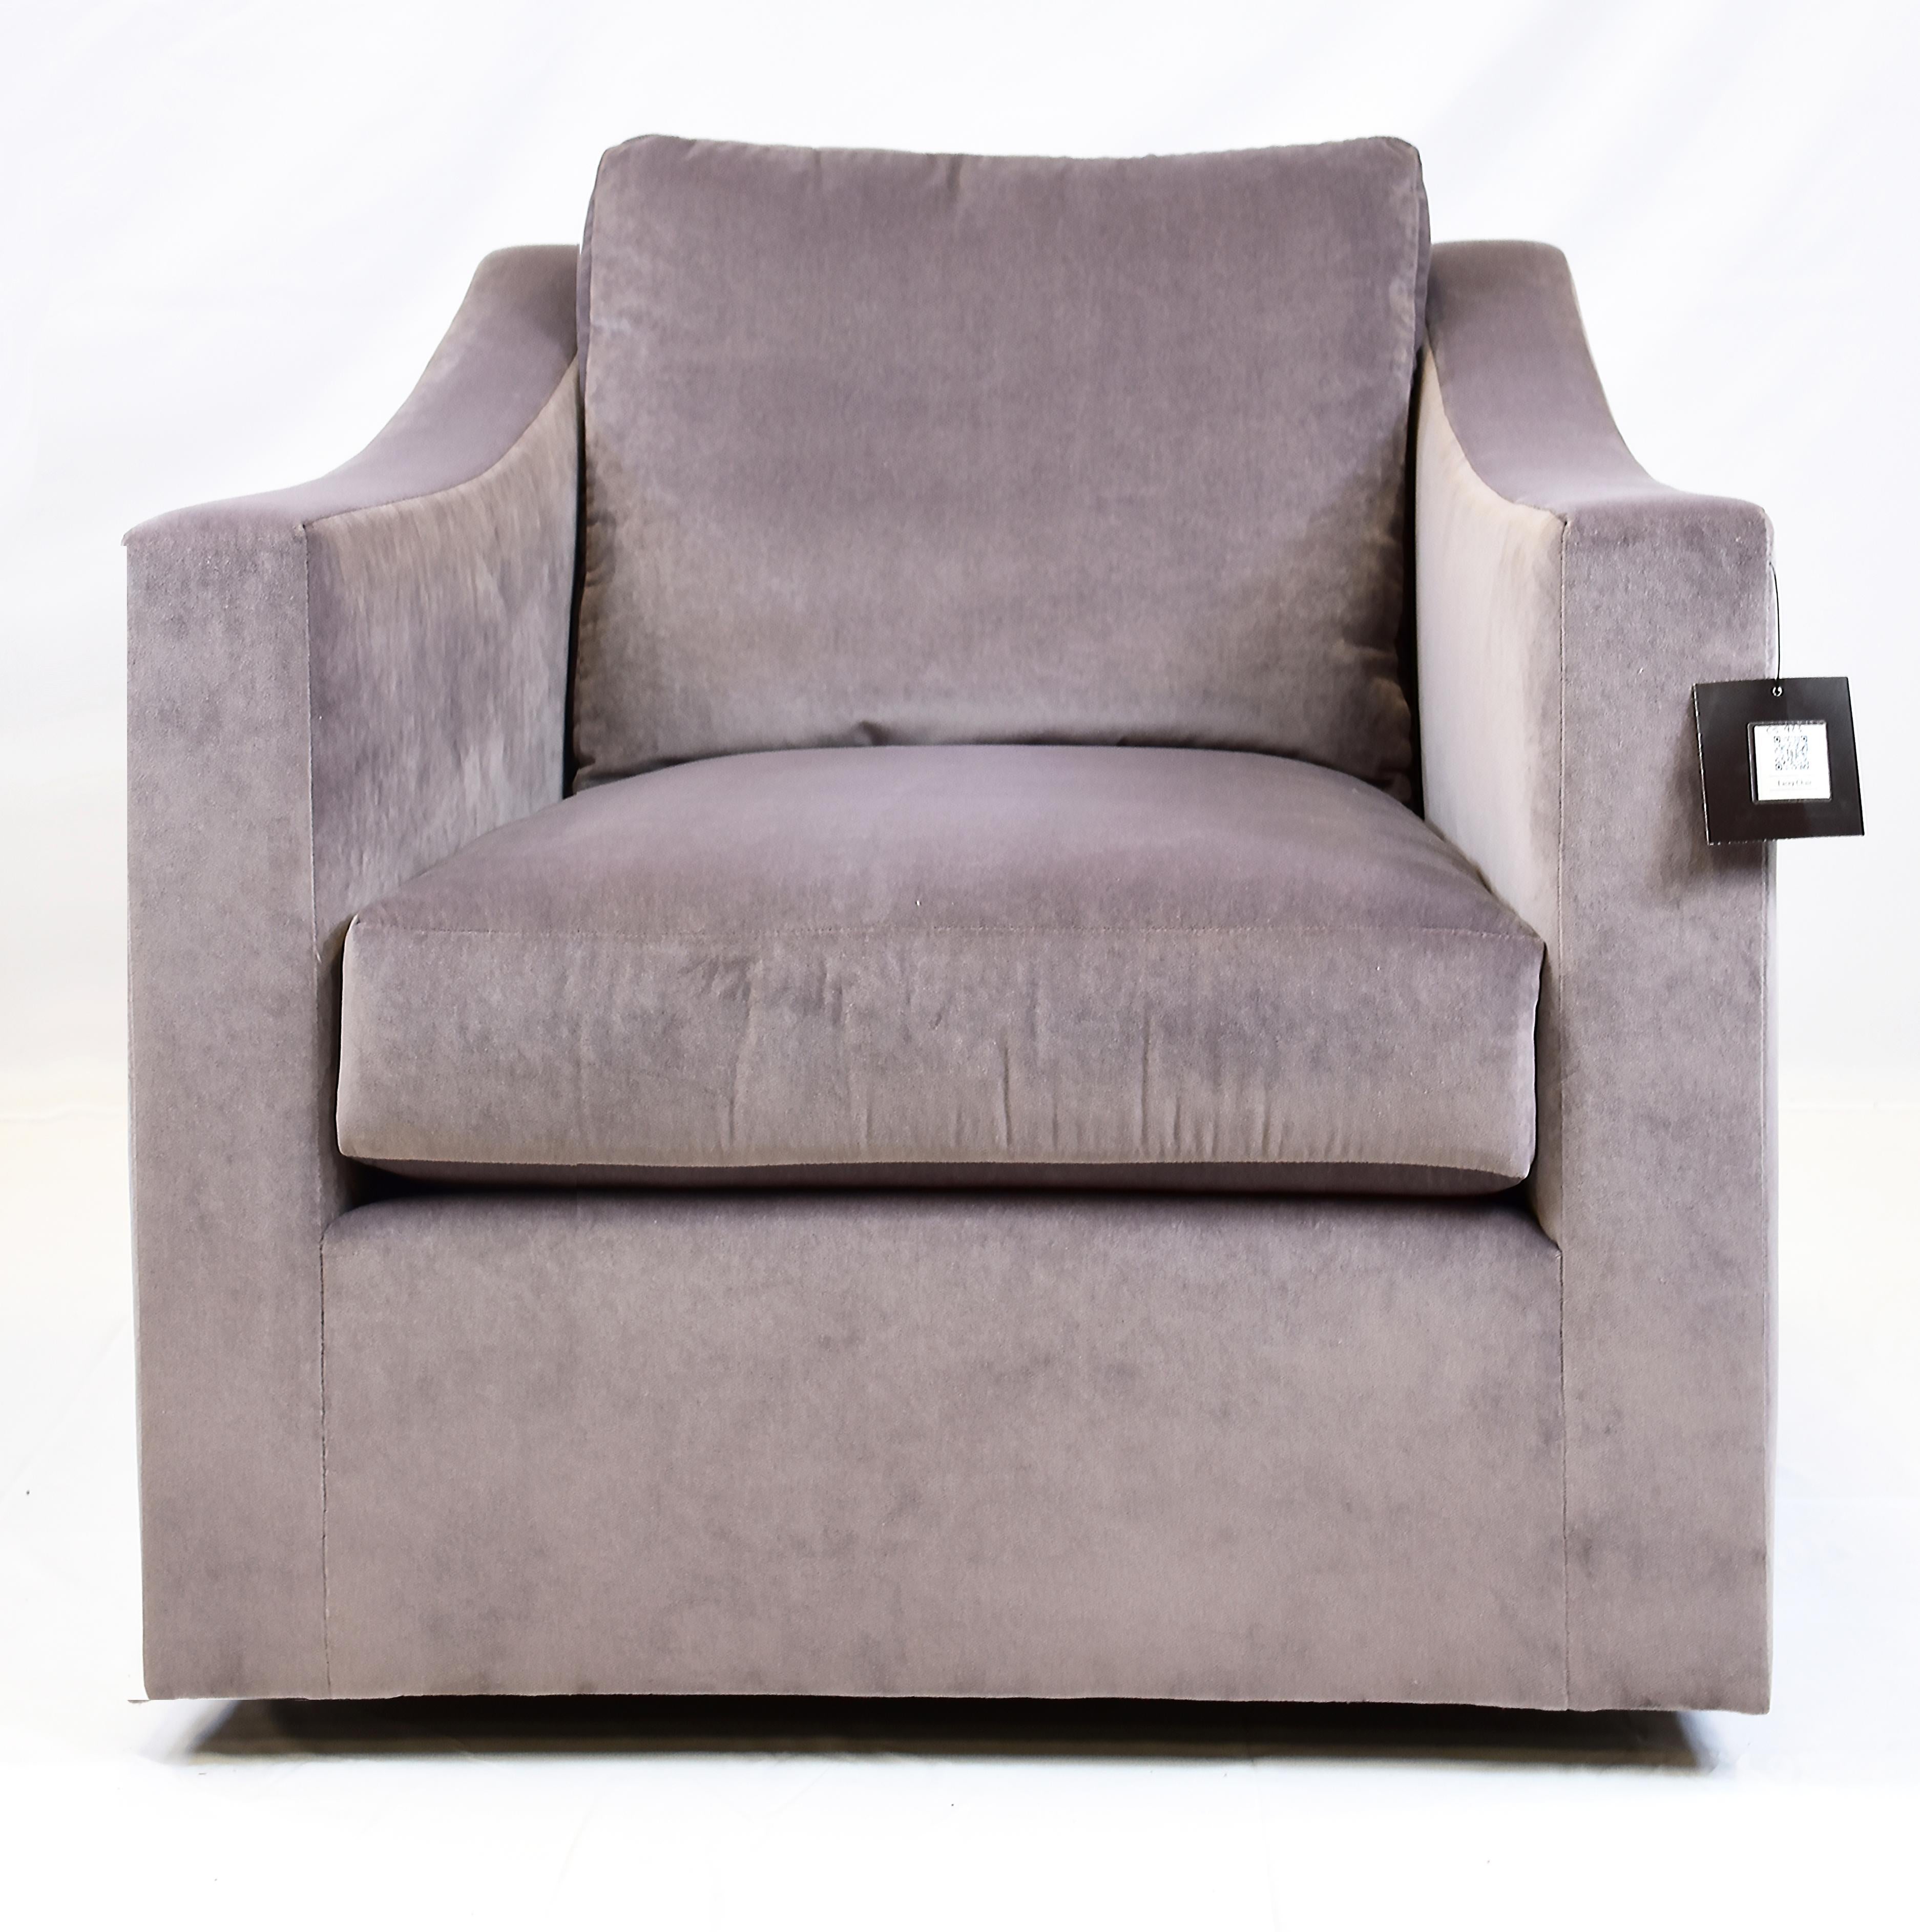 Le Jeune Upholstery Lacey Swivel Lounge Chair Showroom Model

Offered for sale is a Le Jeune Upholstery LACEY swivel lounge chair showroom model in a light lavender.	This chair is a medium-scaled swivel lounge chair that works well as a pair when